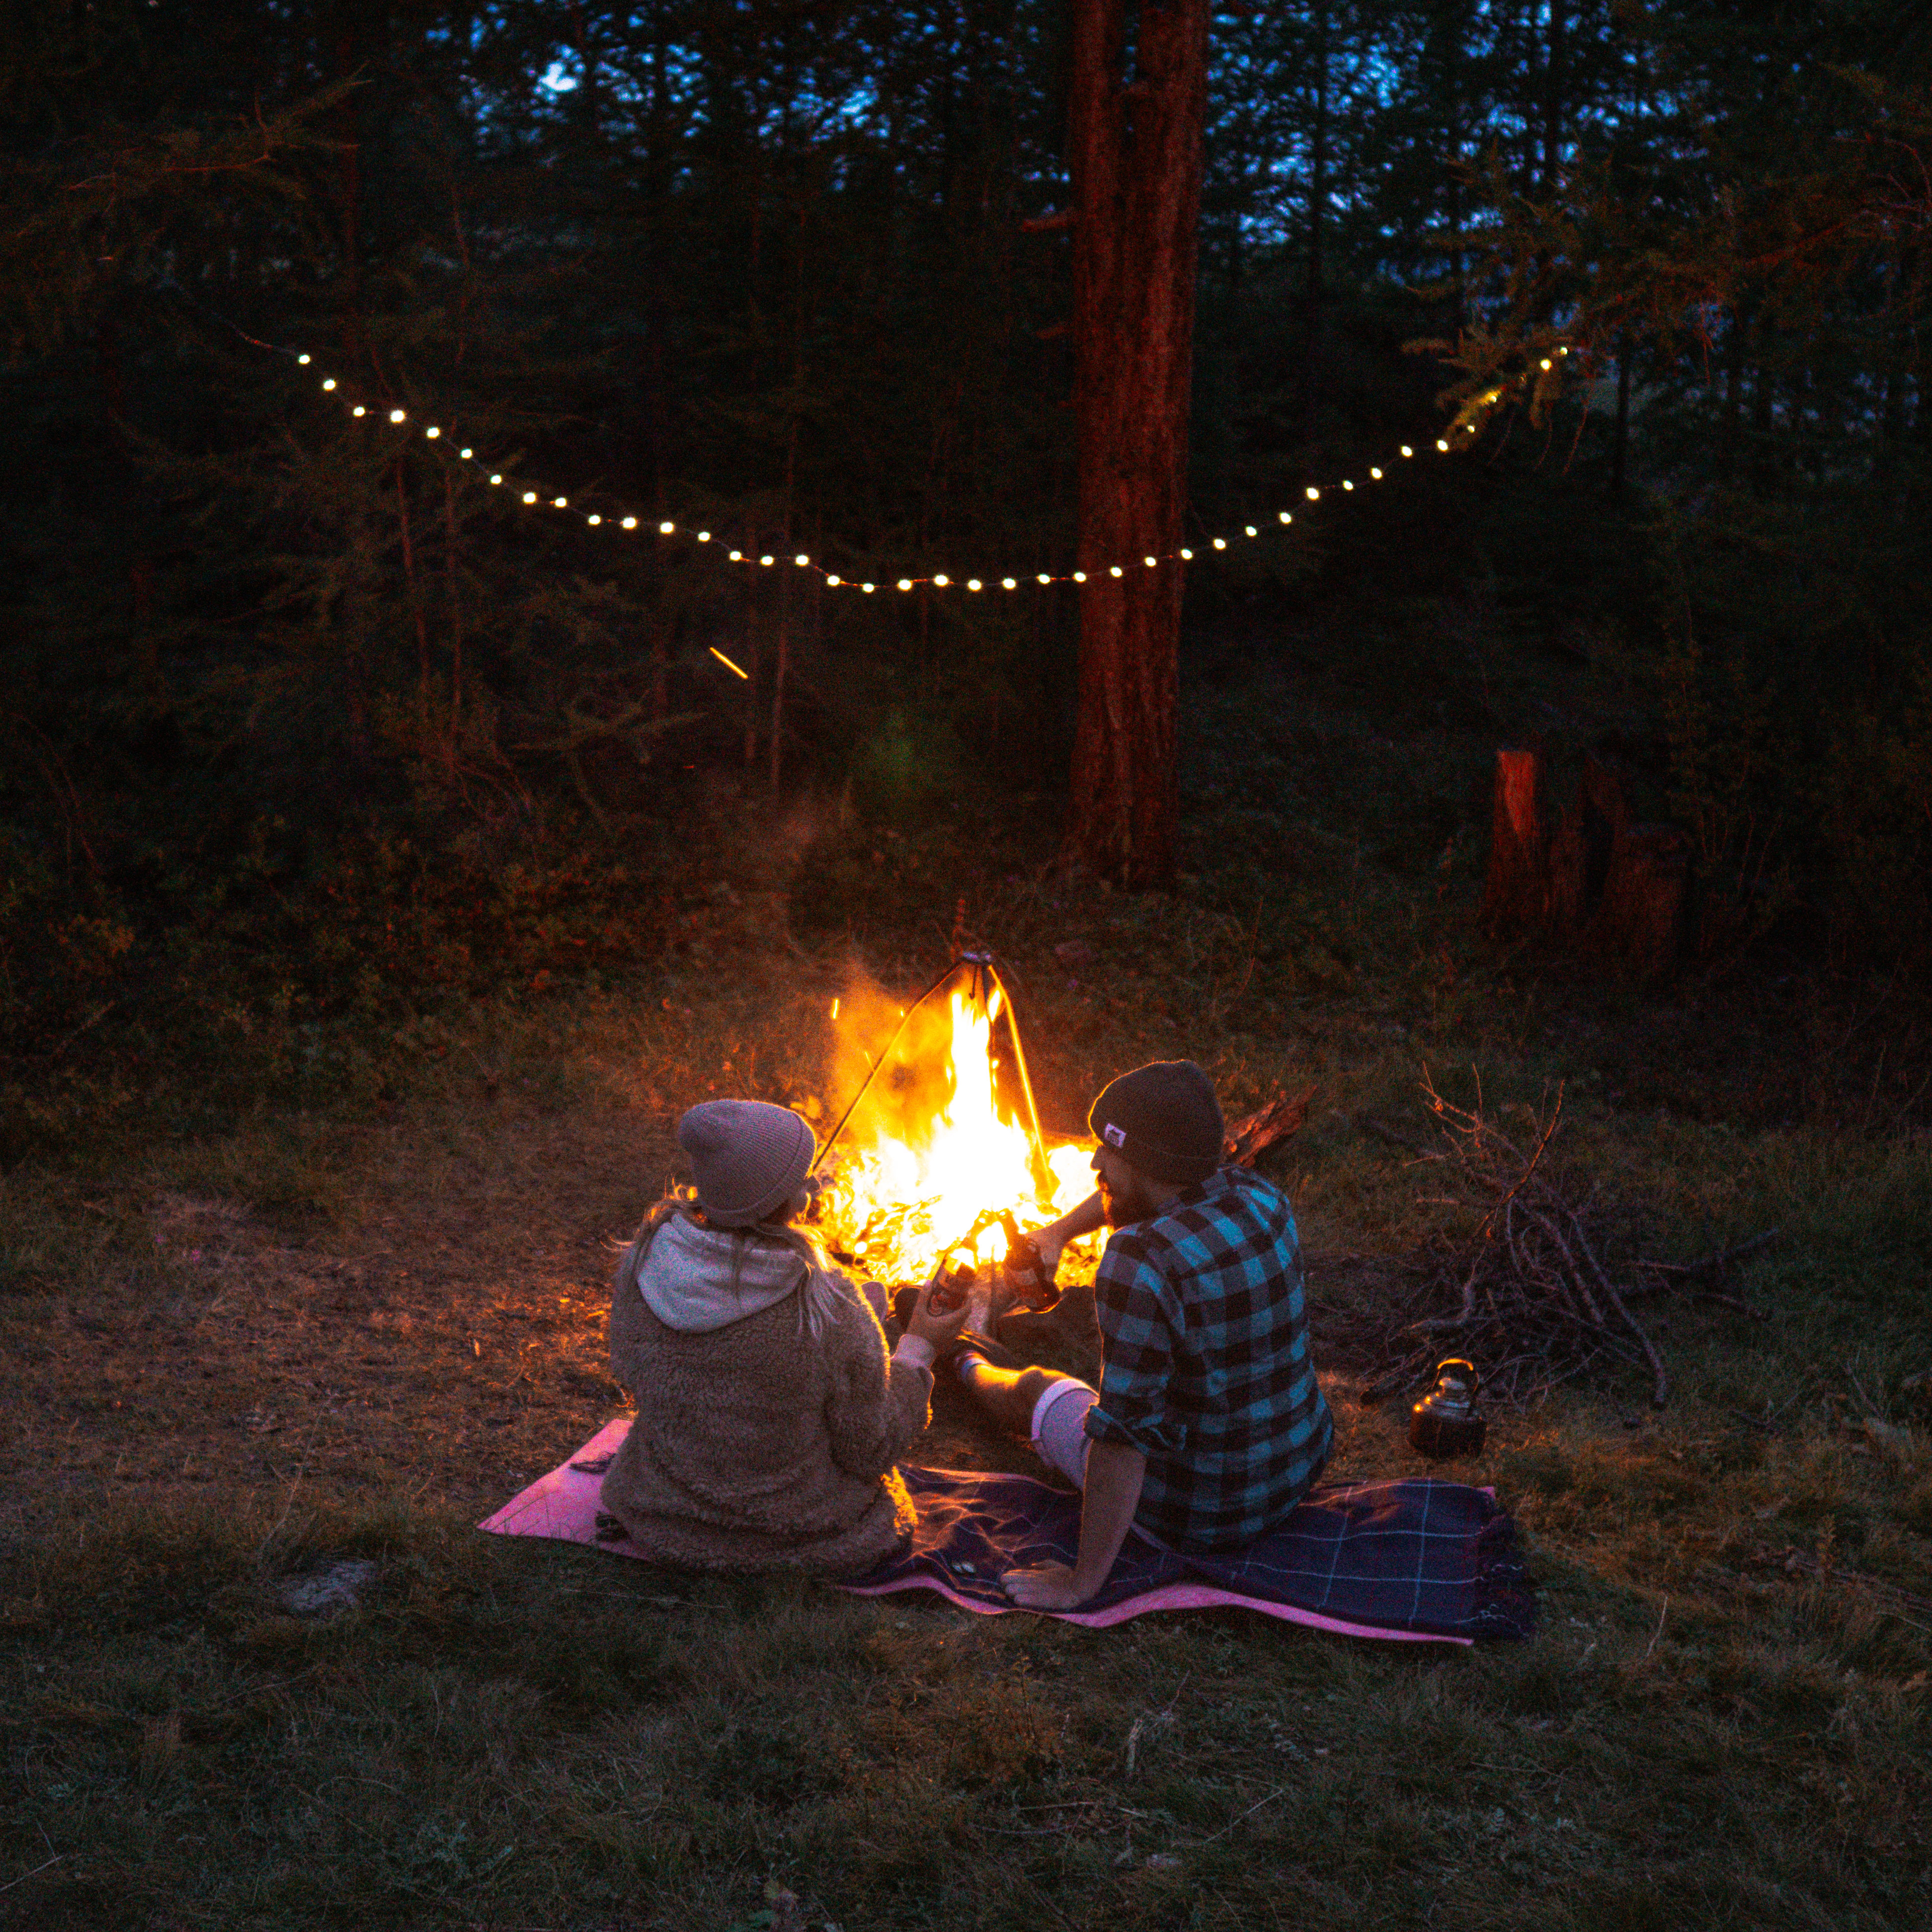 Man and woman sitting on ground near bonfire during nighttime